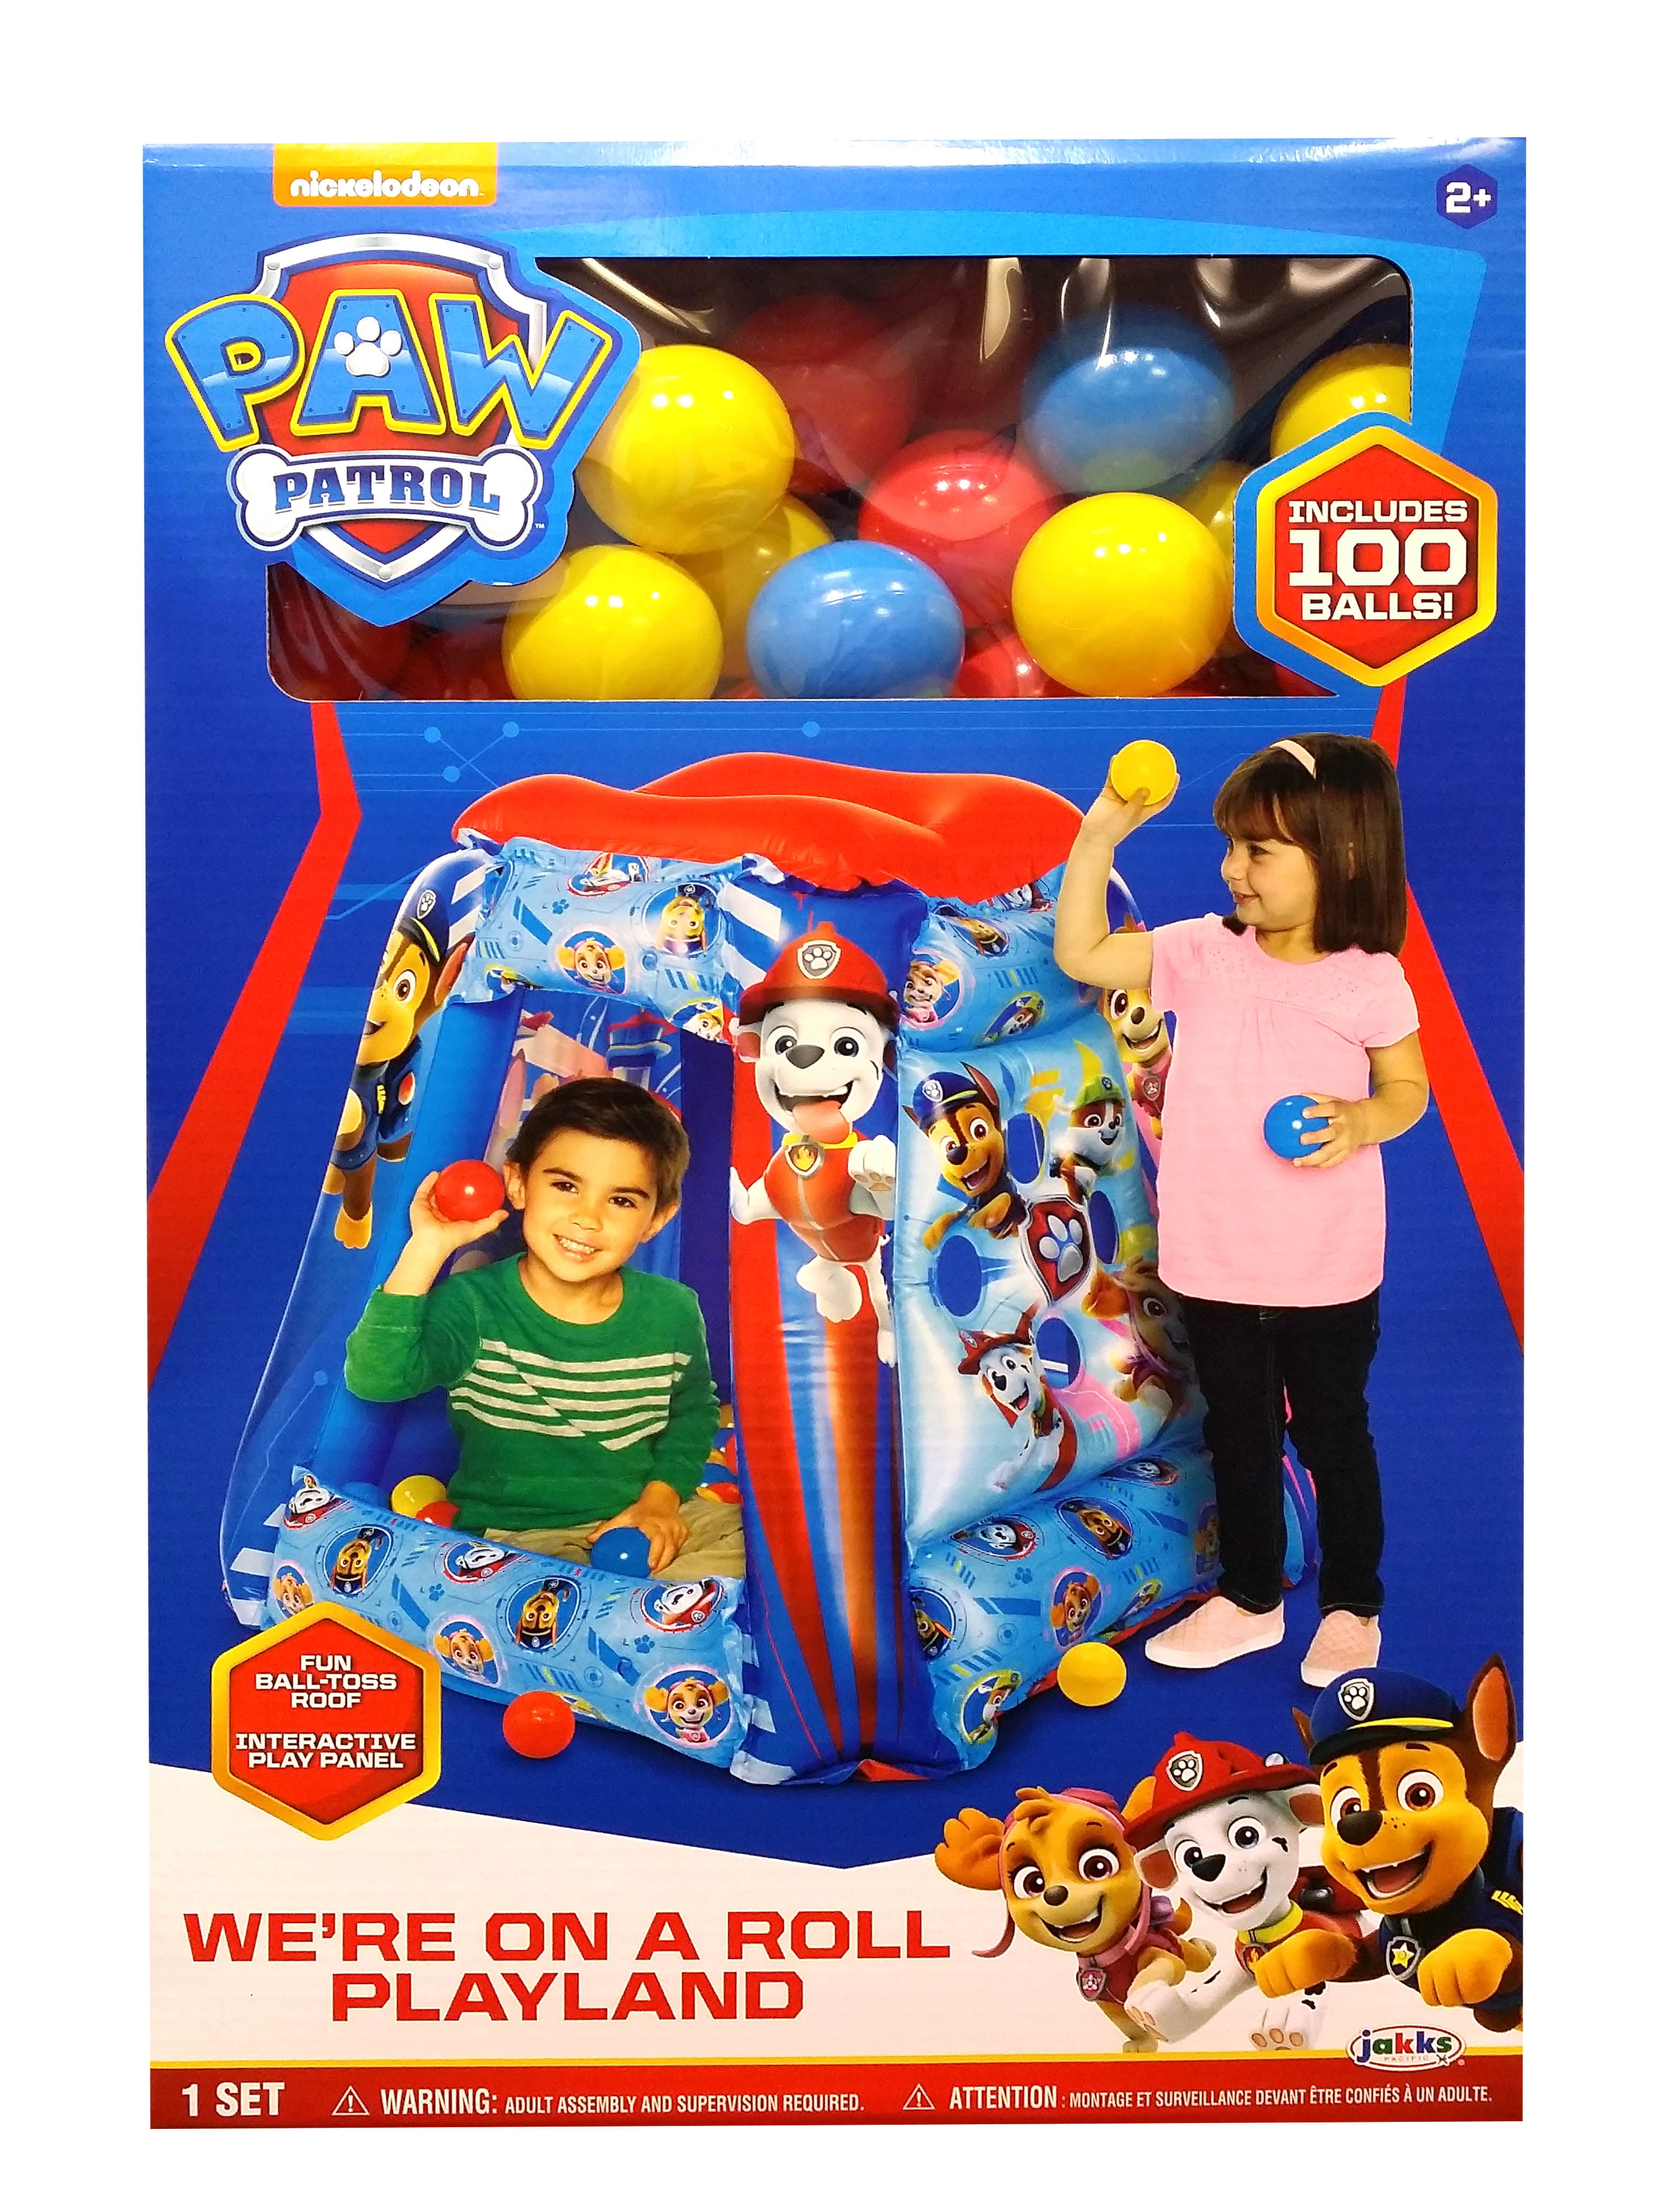 Girls  PAW PATROL 'SKYE' Play Time Inflatable Blow Up Summer Holiday Beach Ball 